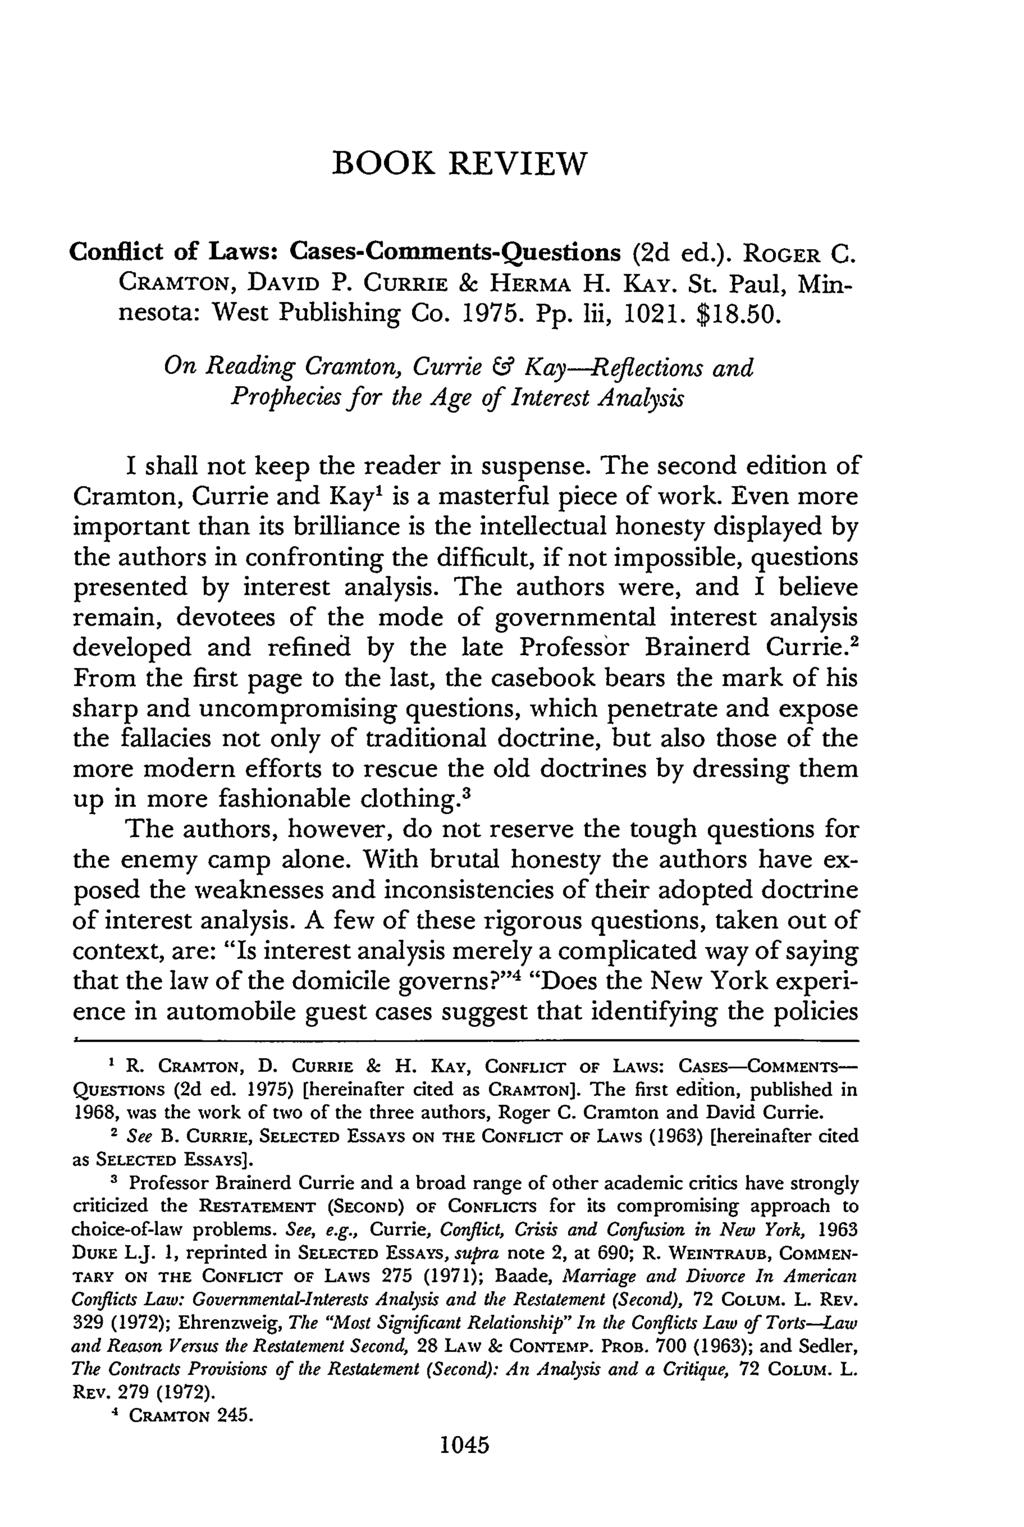 BOOK REVIEW Conflict of Laws: Cases-Comments-Questions (2d ed.). ROGER C. CRAMTON, DAVID P. CURRIE & HERMA H. KAY. St. Paul, Minnesota: West Publishing Co. 1975. Pp. lii, 1021. $18.50.